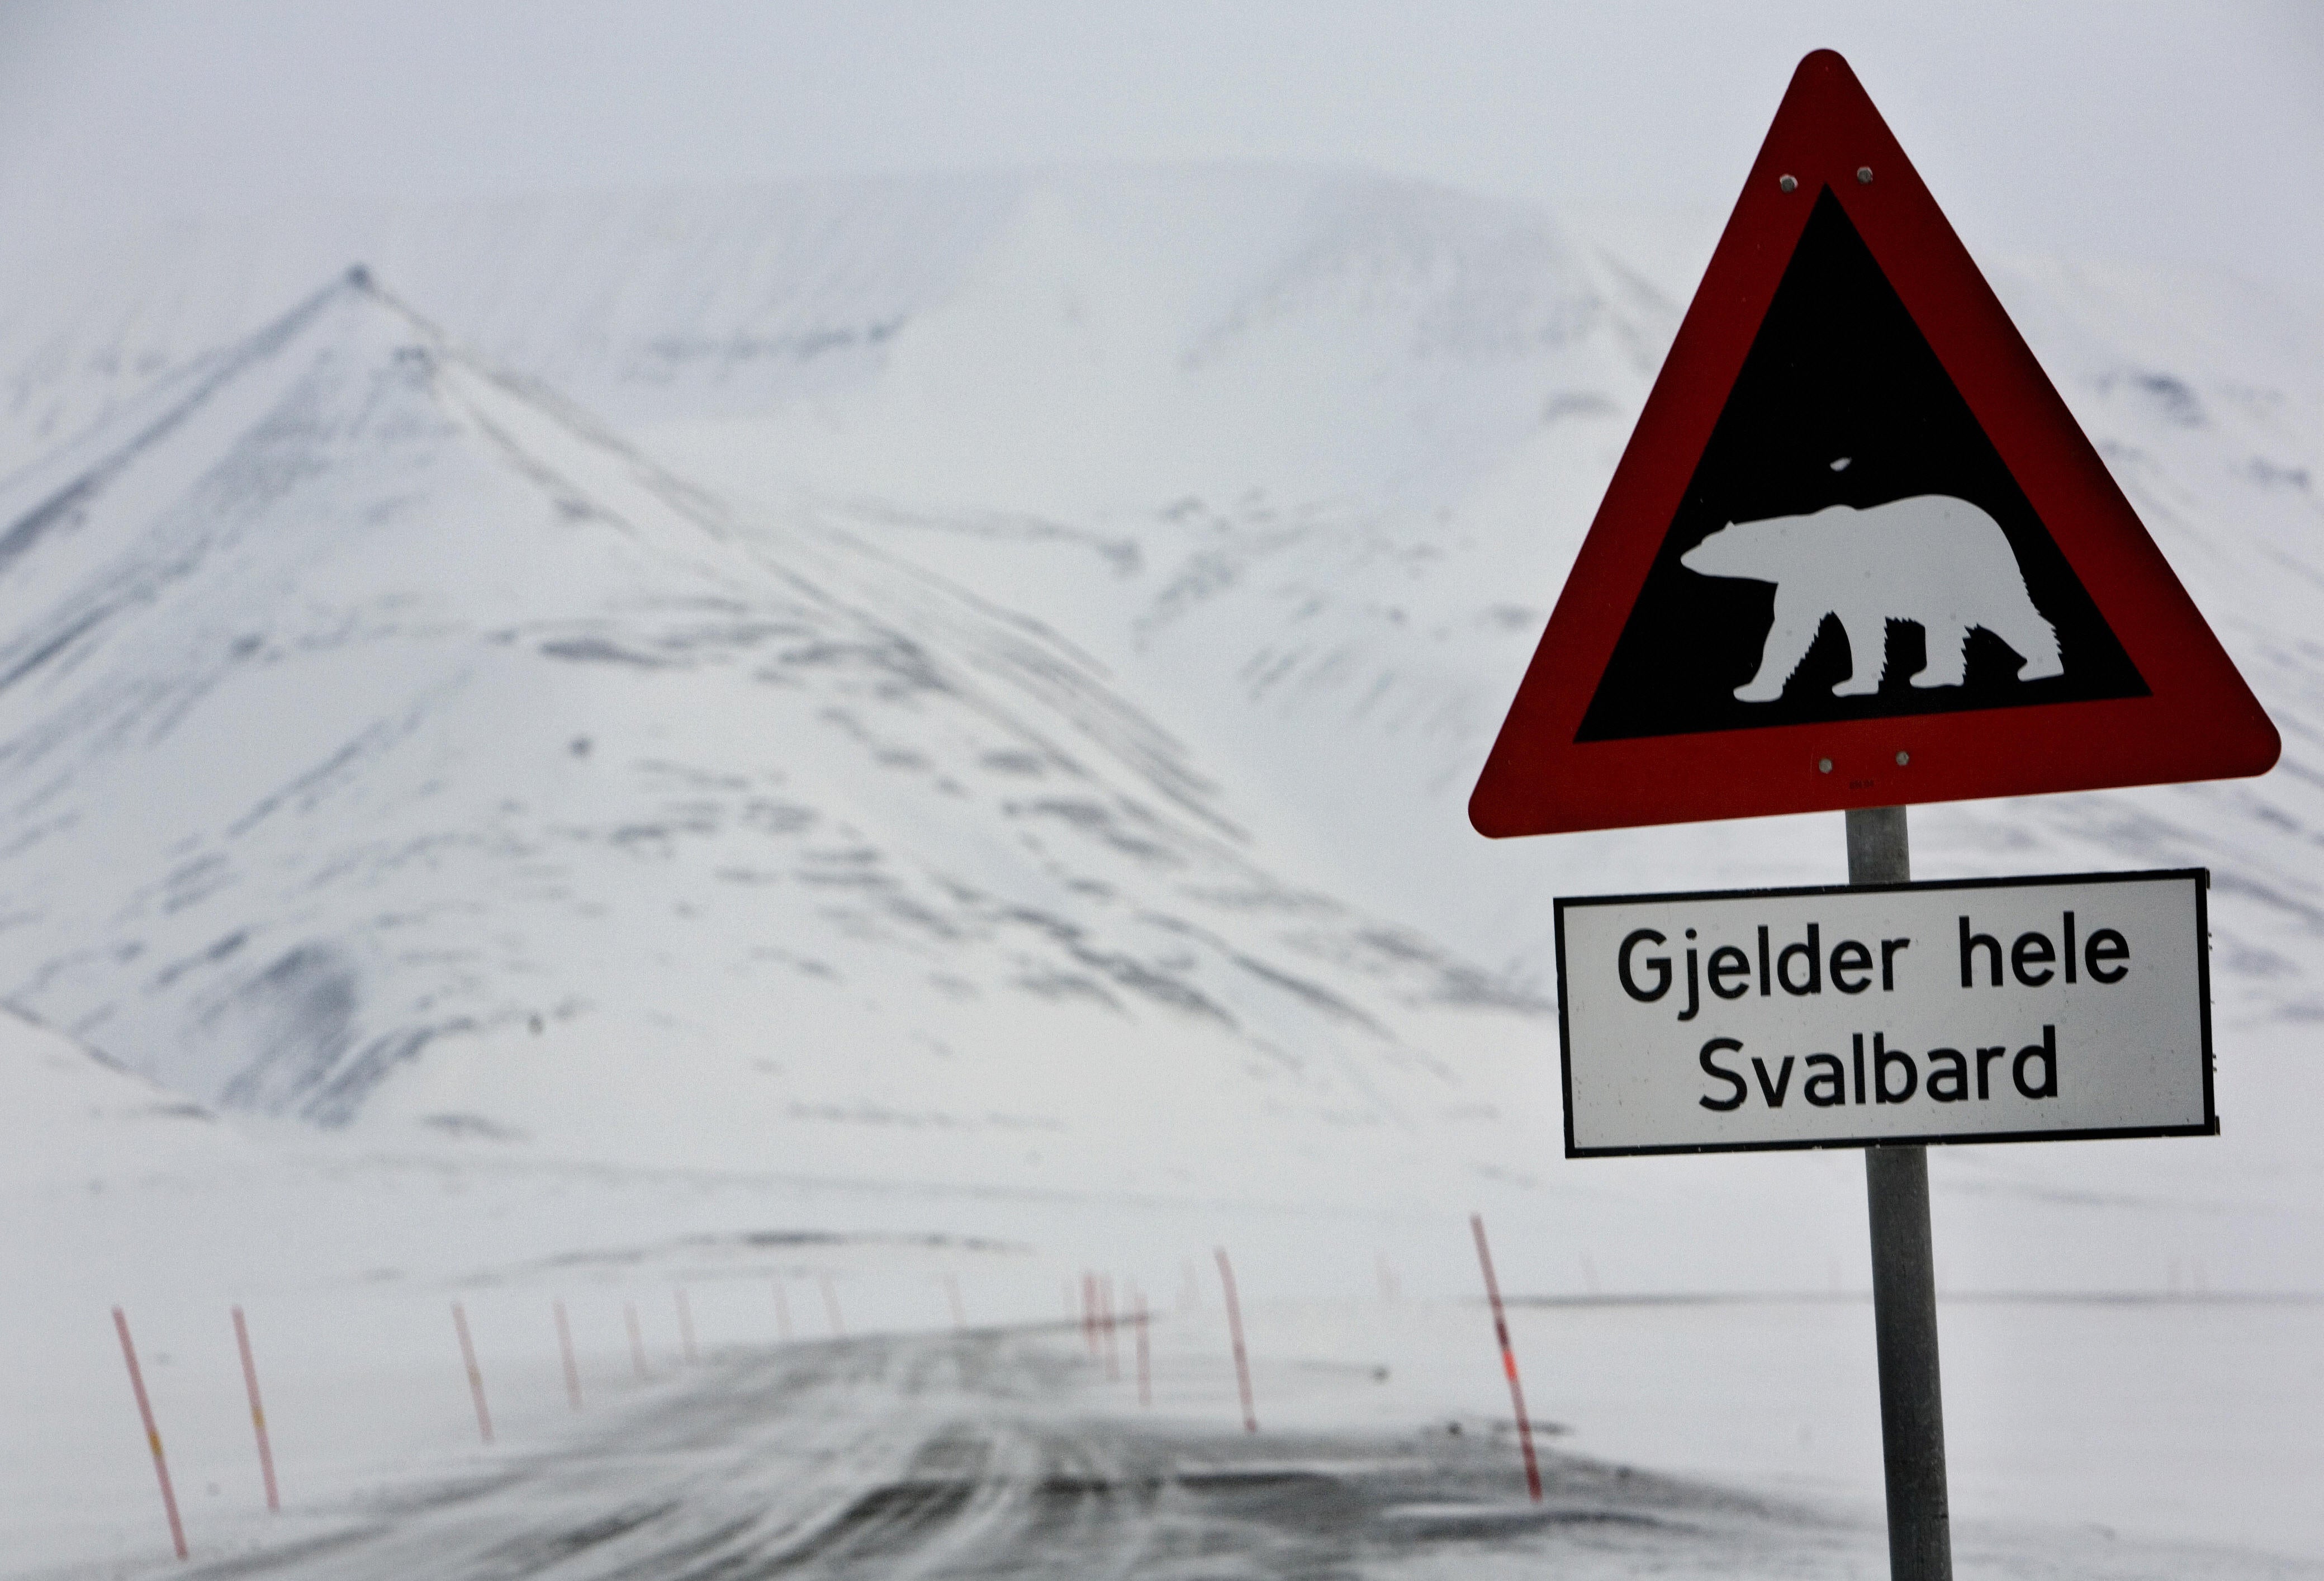 Retreating ice further increases the pressure on the wildlife, including polar bears